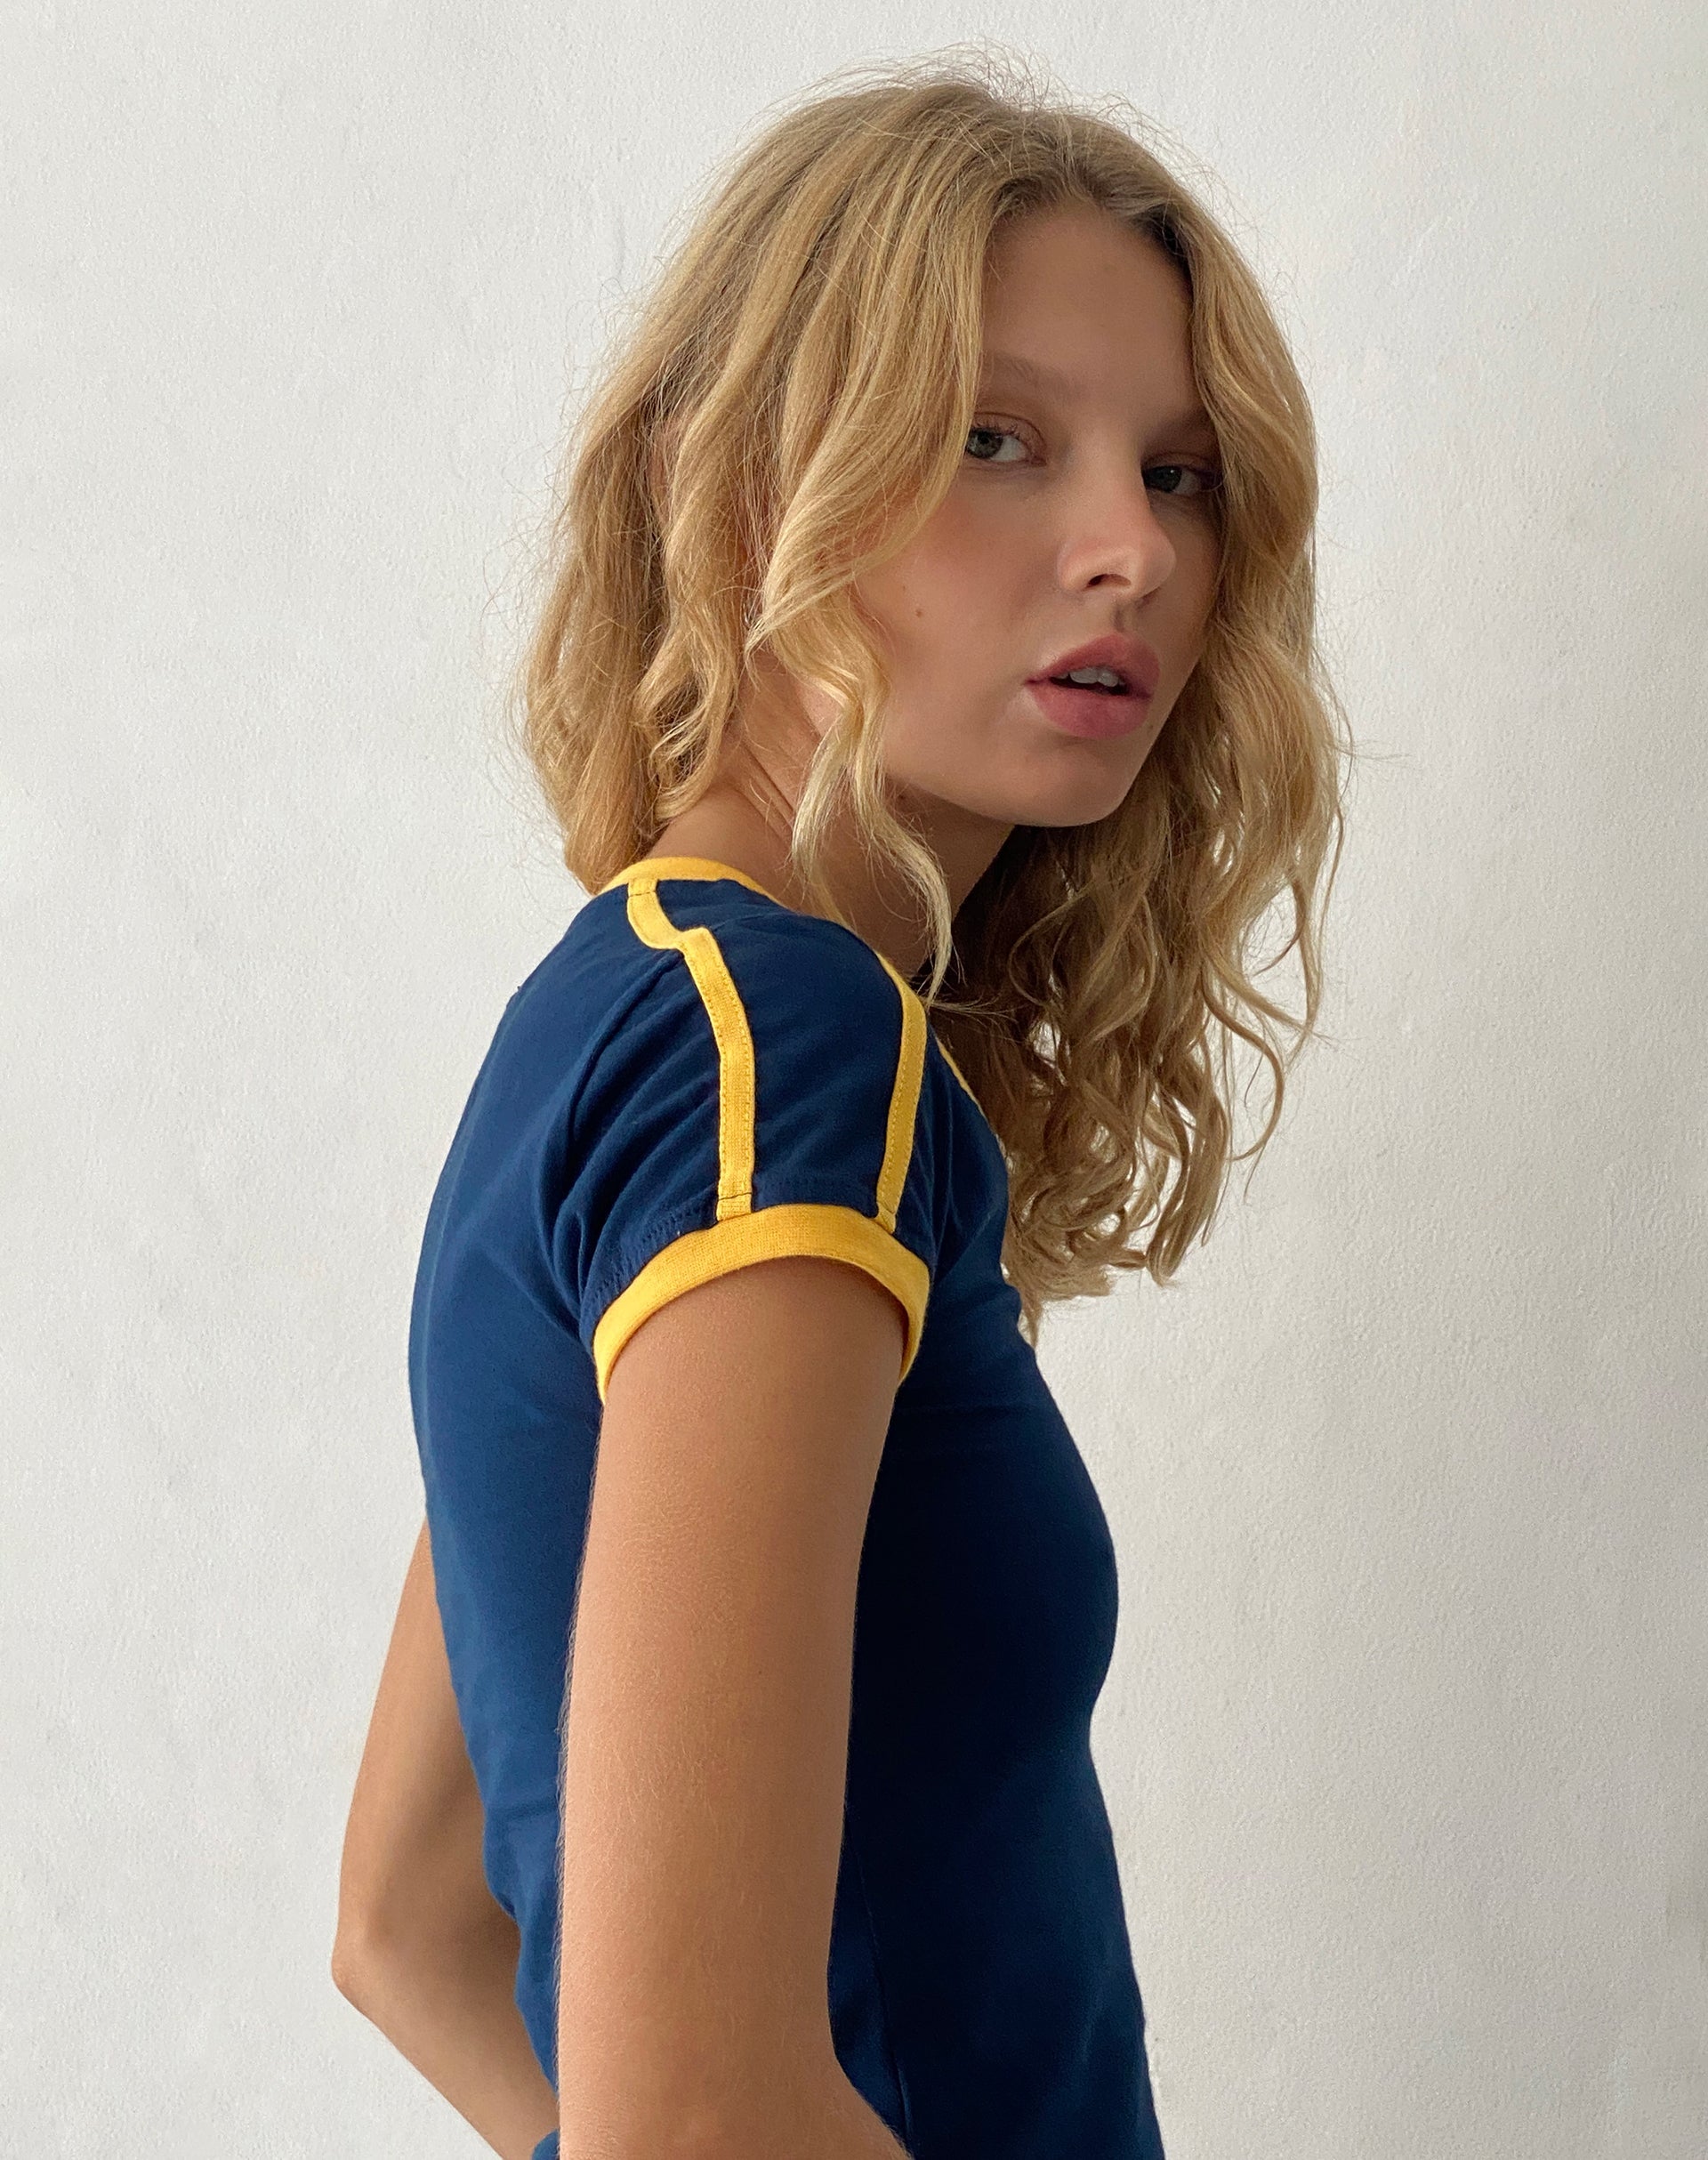 Image of Izolde Tee in Navy with Mustard Binding and M Embroidery